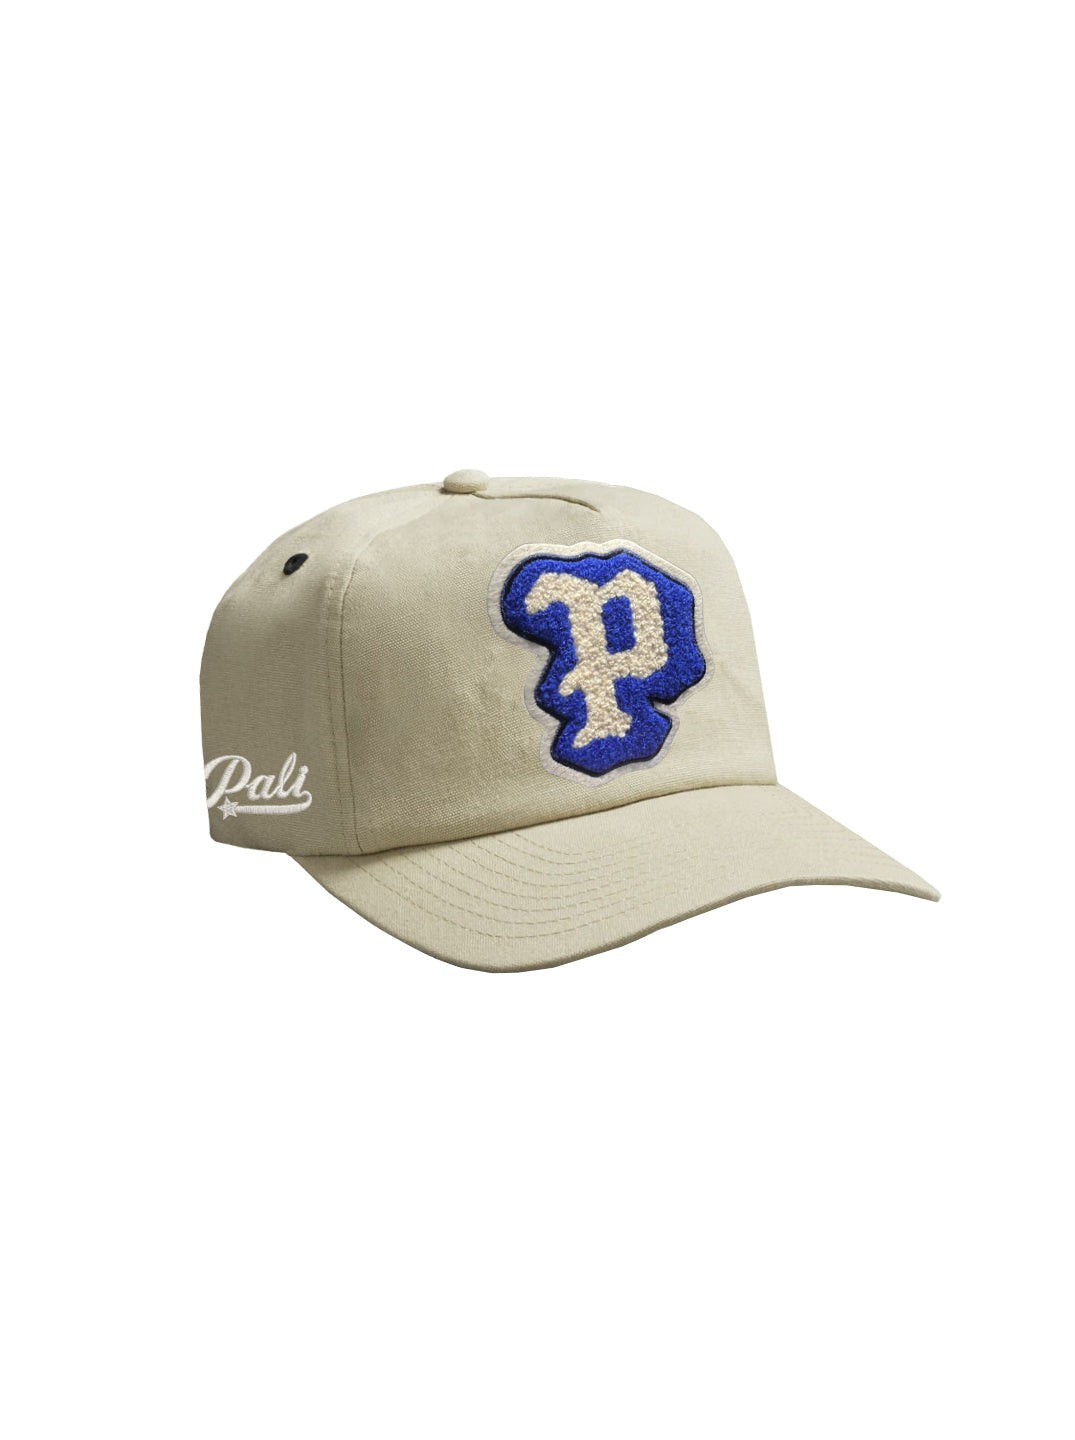 Pali 'P' Patch Embroidered Baseball Cap